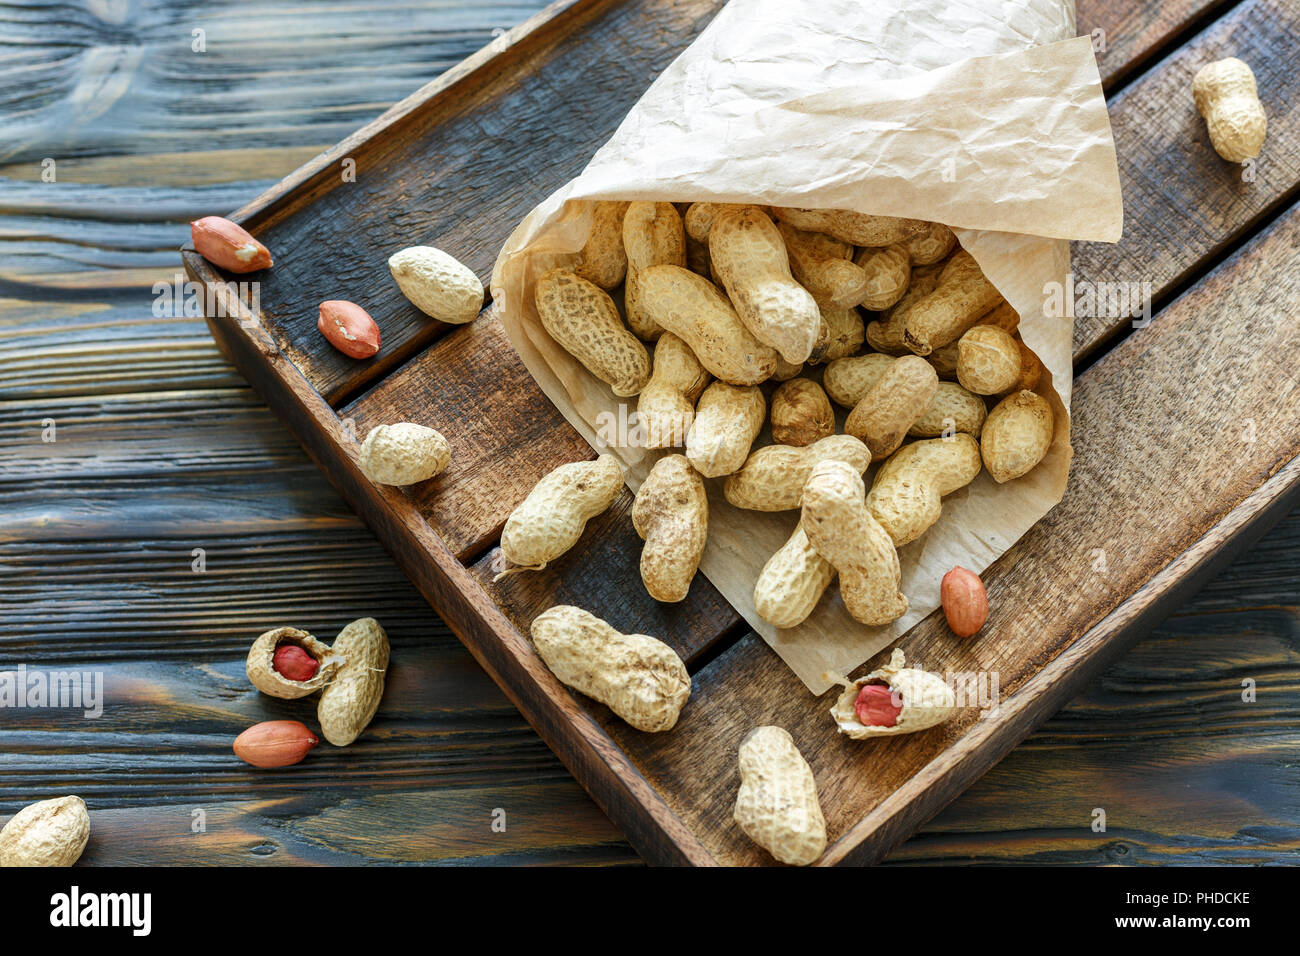 Paper bag with unshelled peanuts. Stock Photo